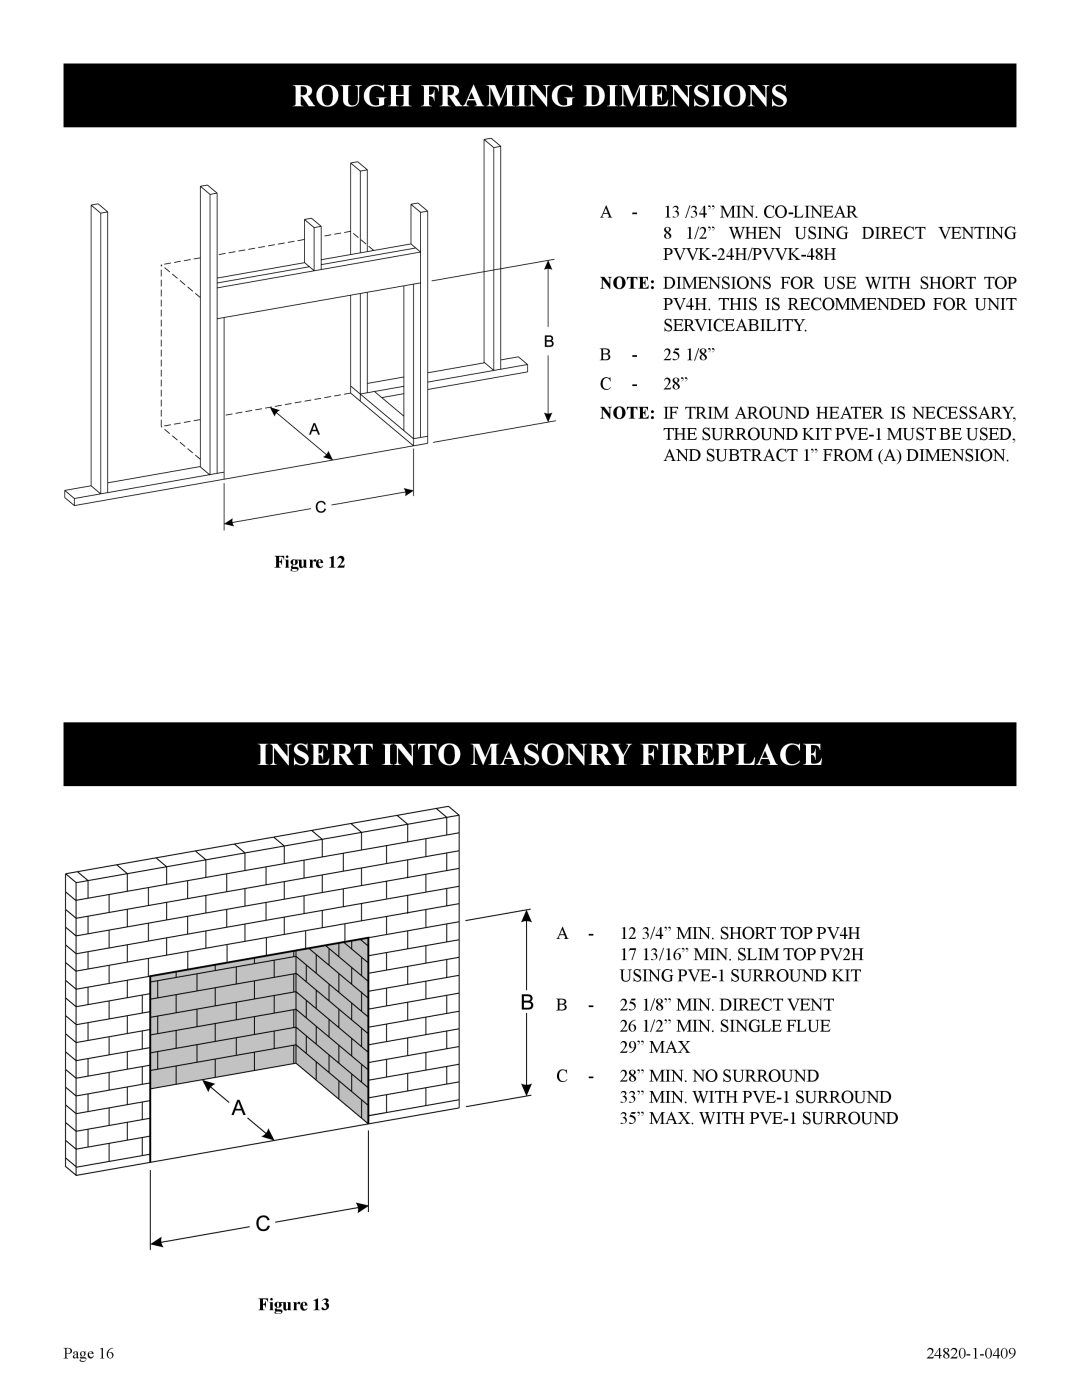 Empire Comfort Systems PV-28SV50-B2H(N,P)-1, PV-28SV50-B(N,P)-1 Rough Framing Dimensions, Insert Into Masonry Fireplace 